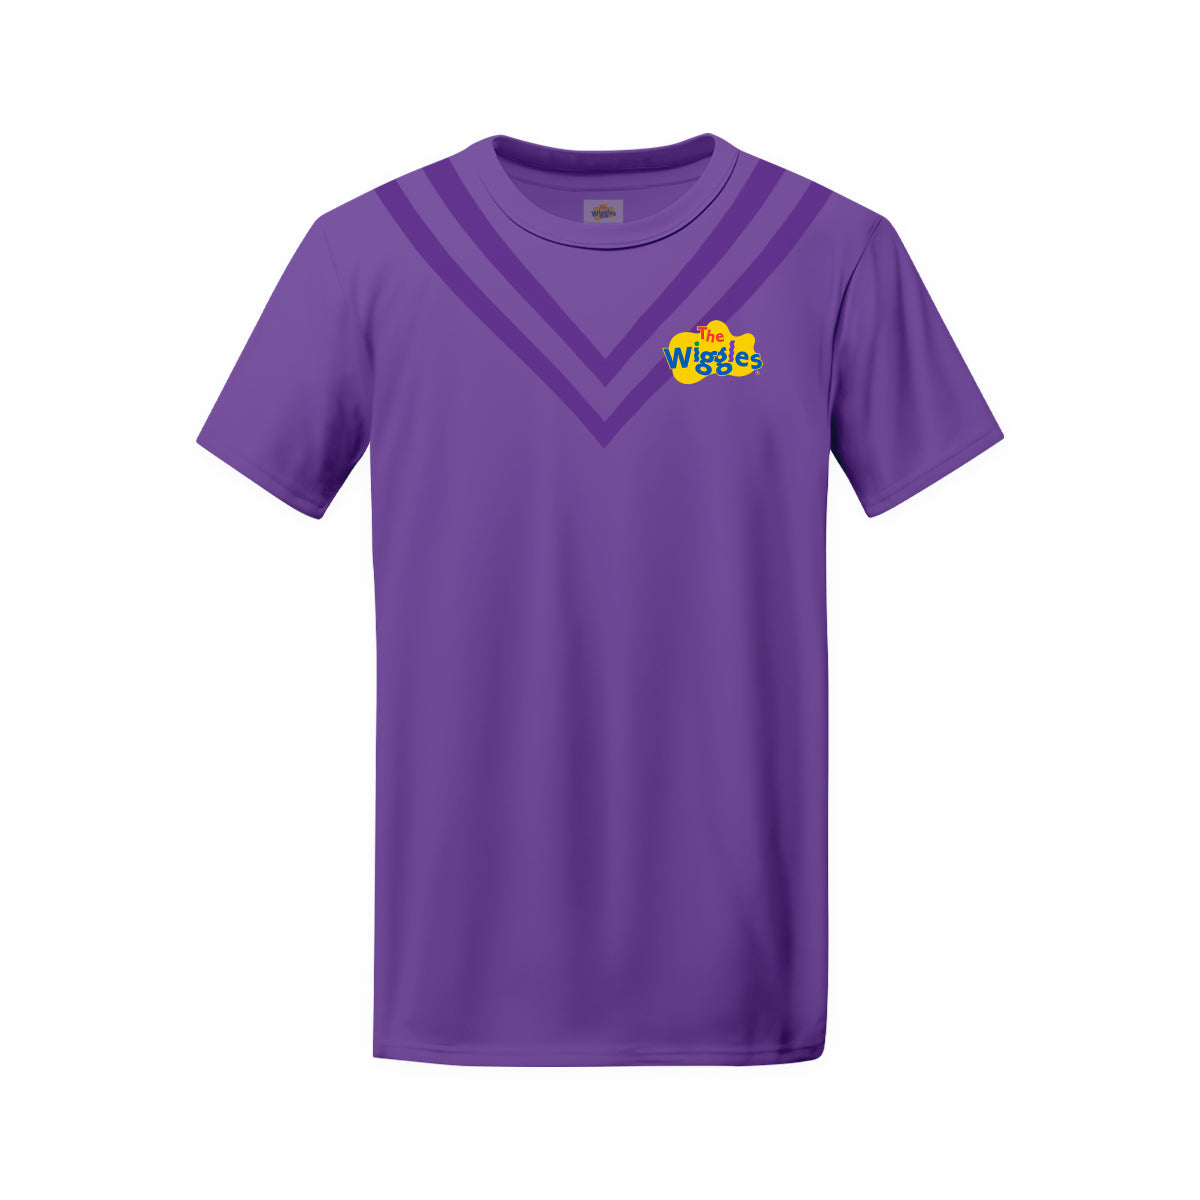 The Wiggles Adult Costume T-shirt